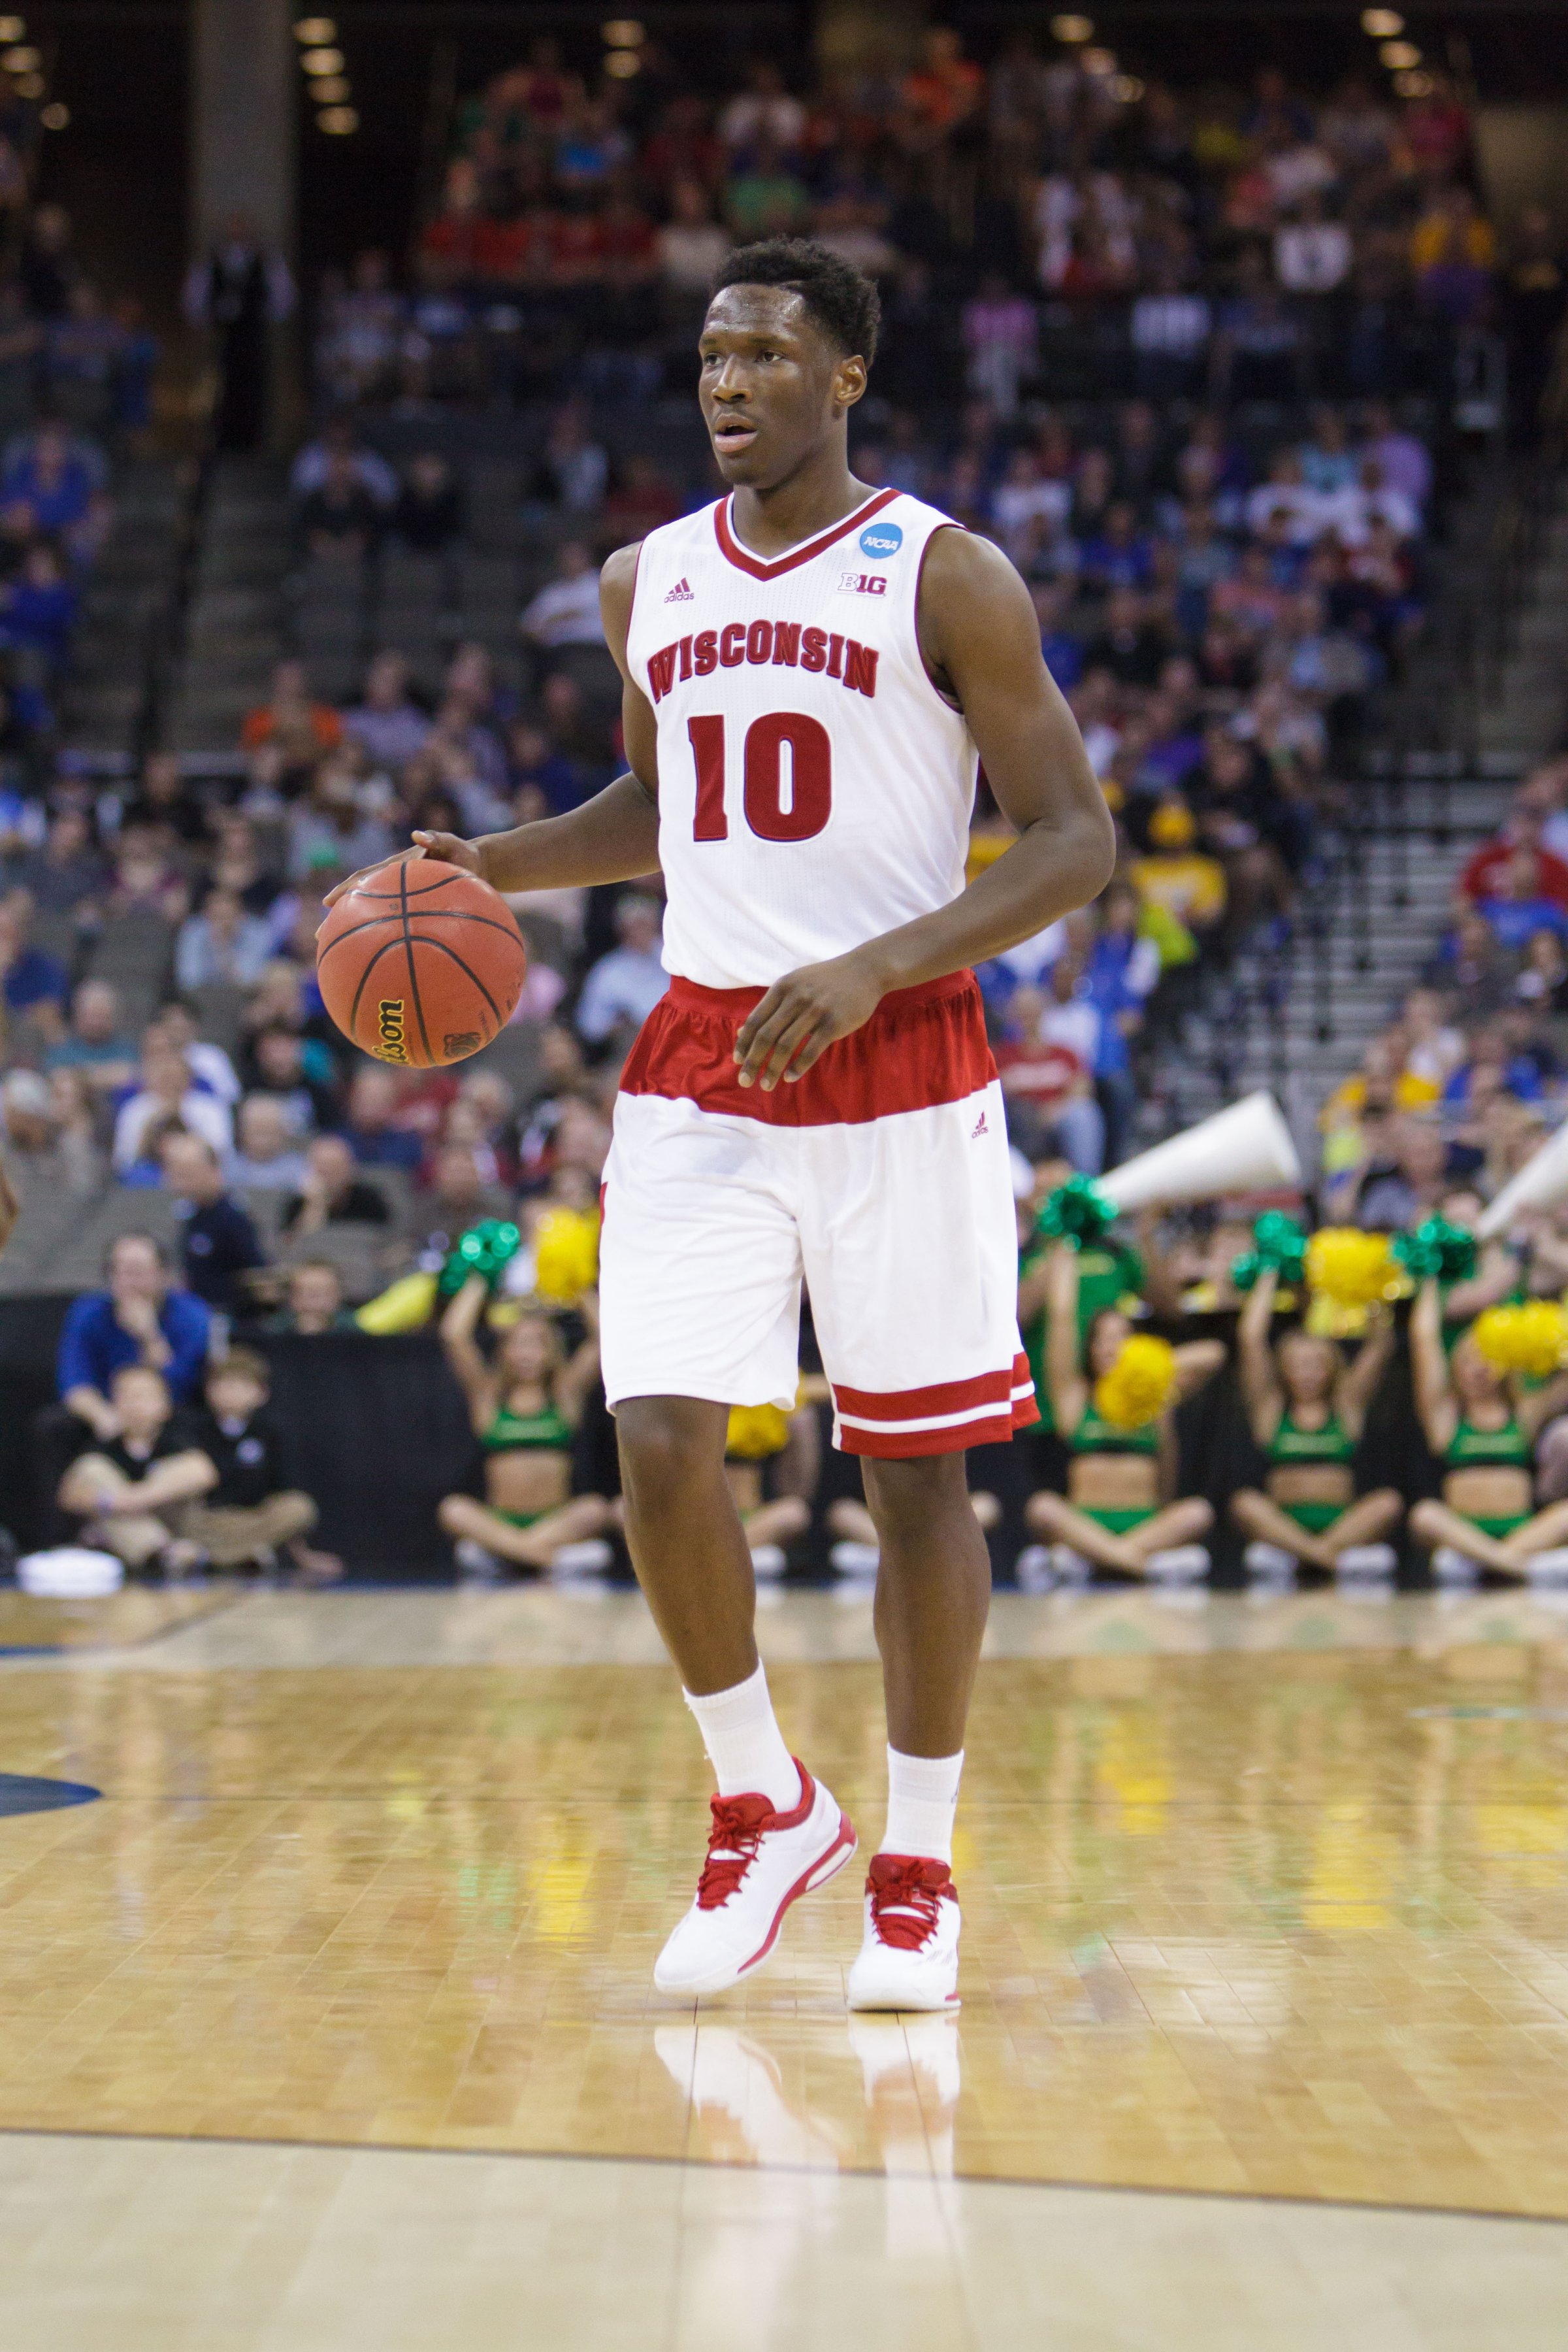 Wisconsin Badgers forward Nigel Hayes during the a game against Oregon Ducks in Omaha, Neb. on March 22, 2015.